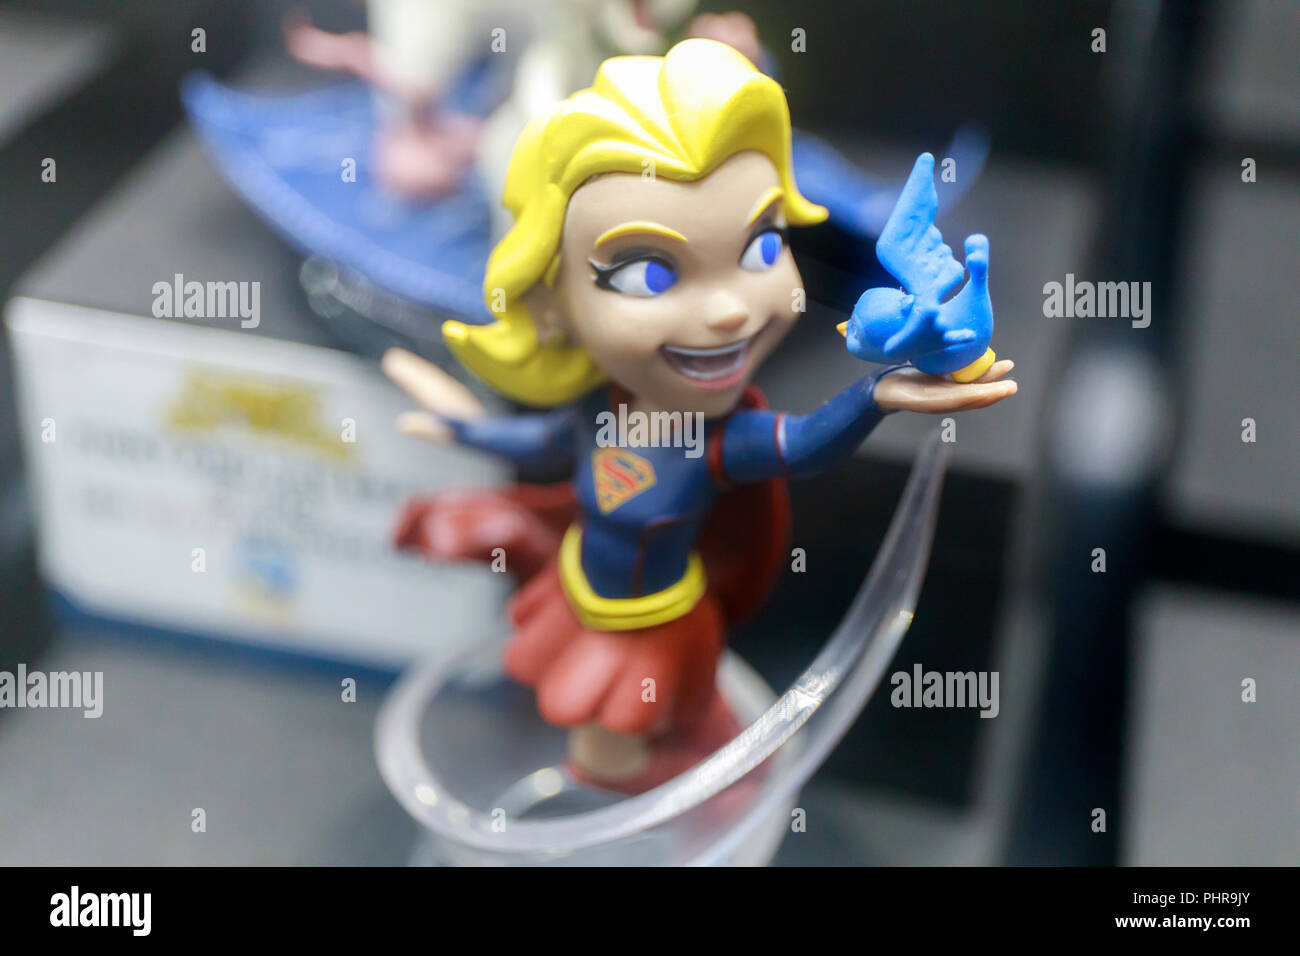 Supergirl figurine for sale at the exhibit hall during San Diego Comic Con 2018 Stock Photo